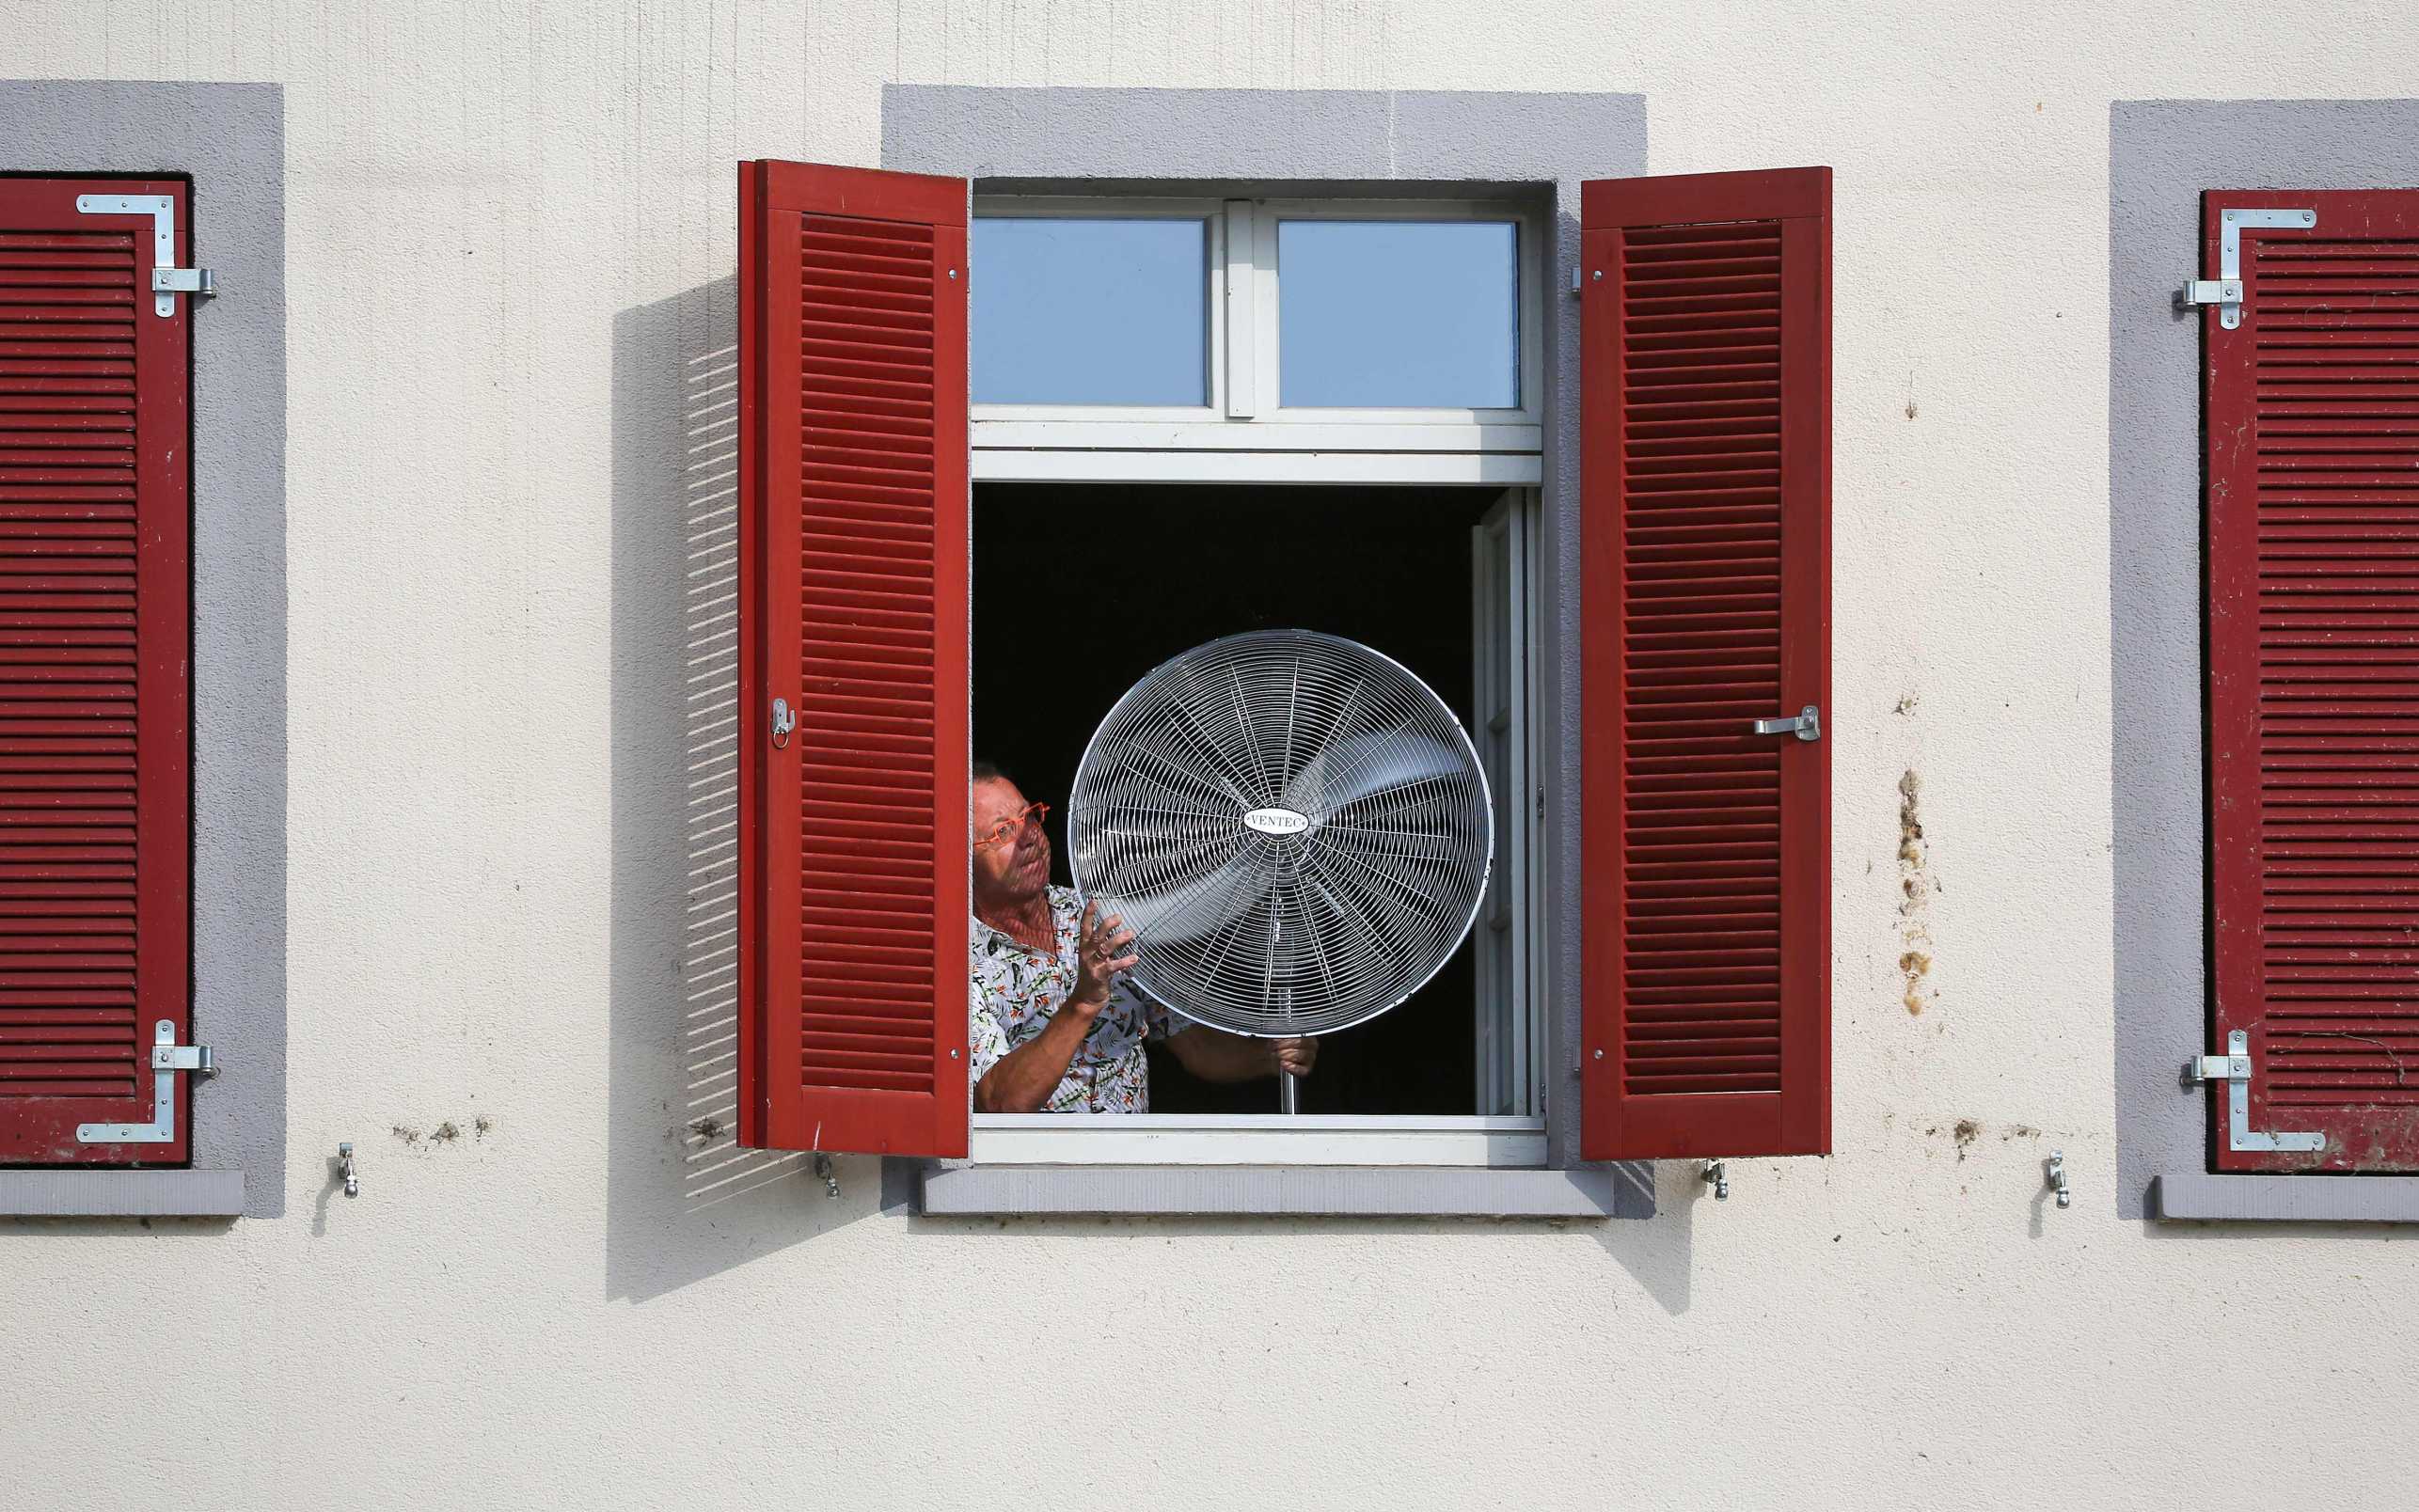 Man with a fan at the window